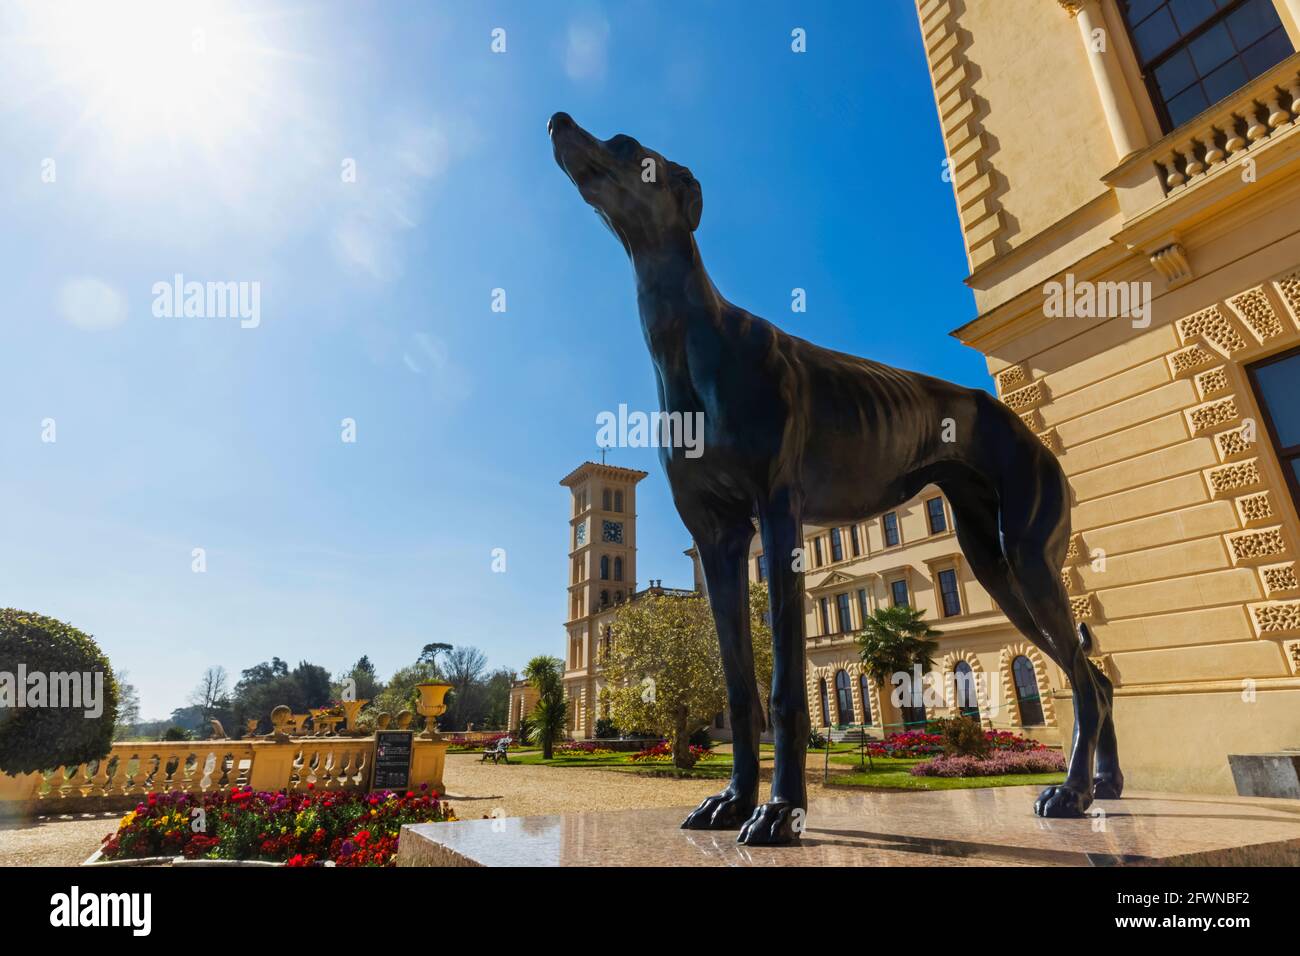 England, Isle of Wight, East Cowes, Osborne House, The Palatial Former Home of Queen Victoria,, Bronze Statue of Eos, Prince Albert's favorite dog Stock Photo